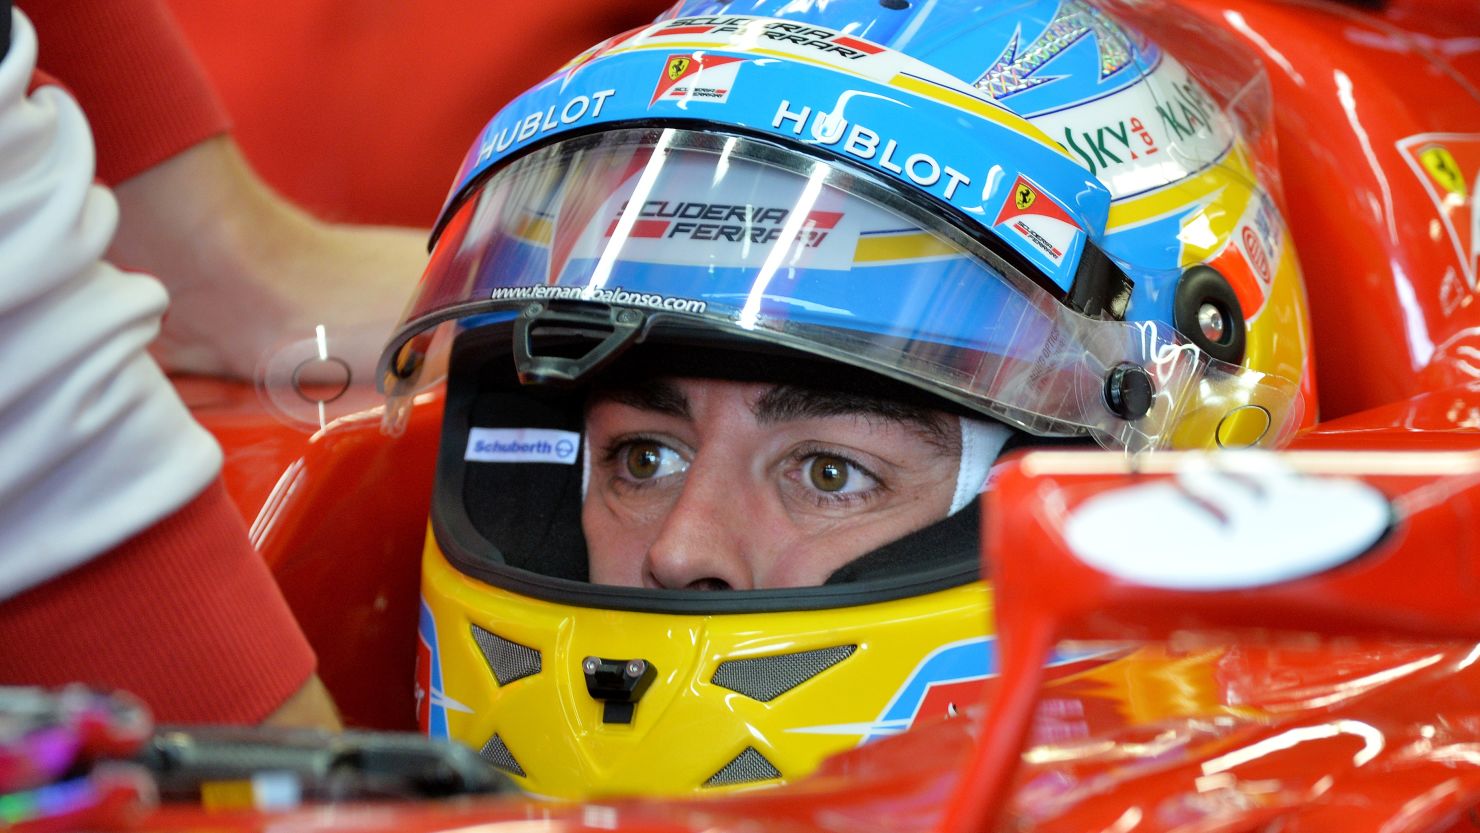 Fernando Alonso was the fastest in Friday's second practice session in Montreal ahead of Lewis Hamilton. 